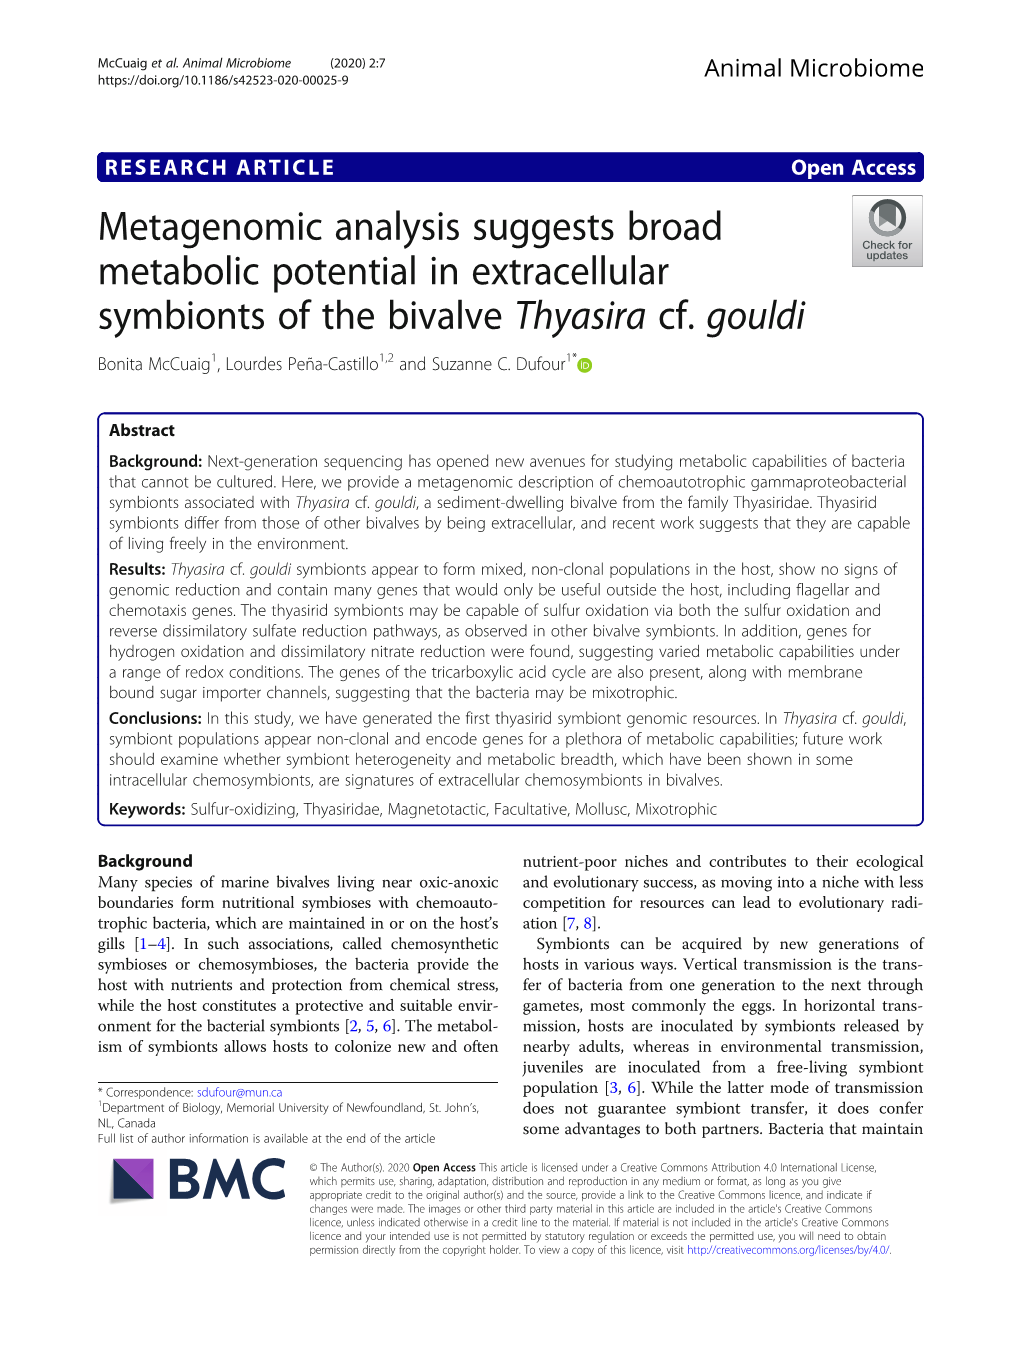 Metagenomic Analysis Suggests Broad Metabolic Potential in Extracellular Symbionts of the Bivalve Thyasira Cf